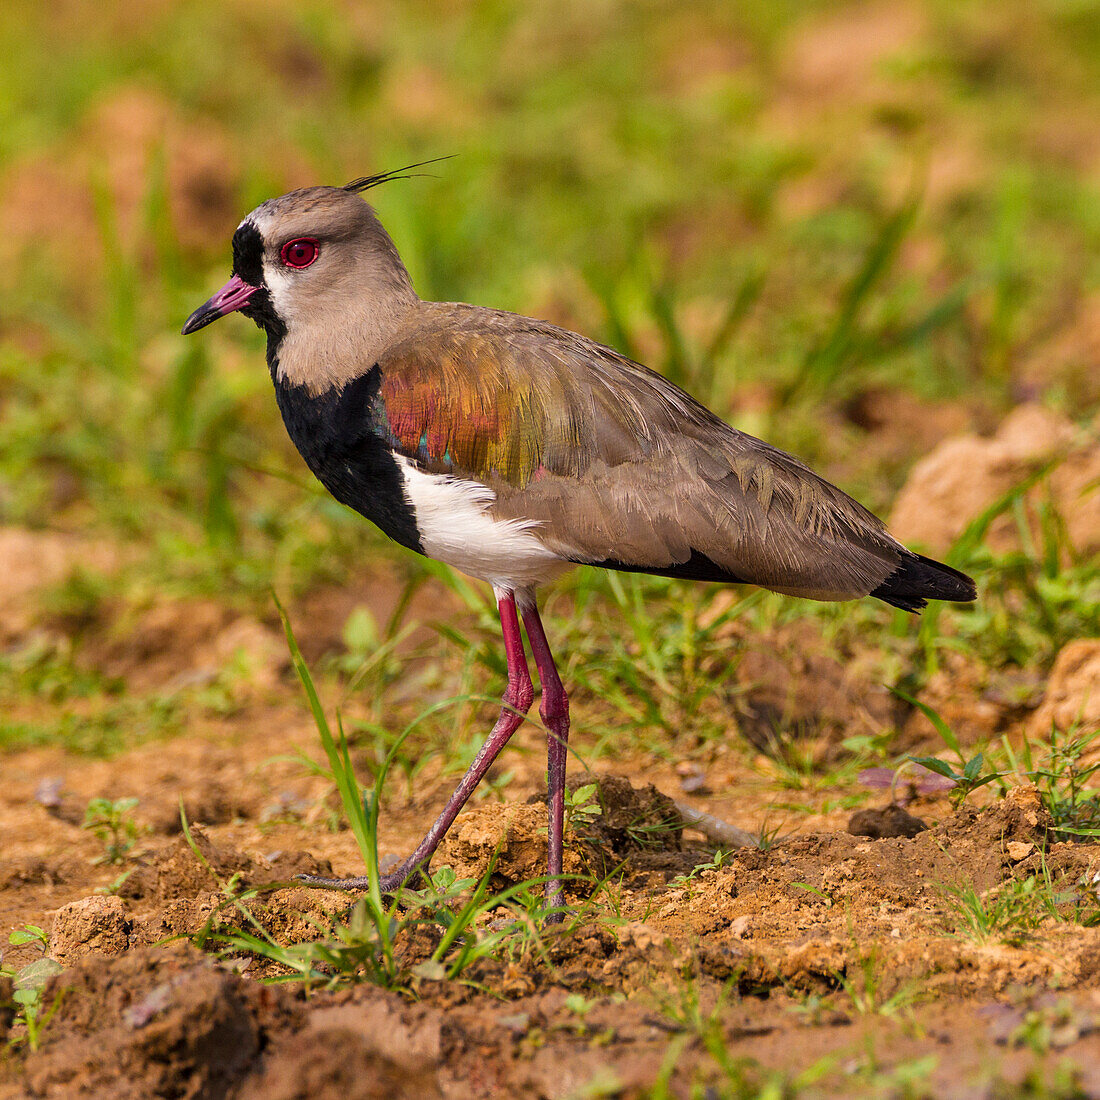 Brazil. A southern lapwing (Vanellus chilensis) foraging along the banks of a river in the Pantanal, the world's largest tropical wetland area, UNESCO World Heritage Site.